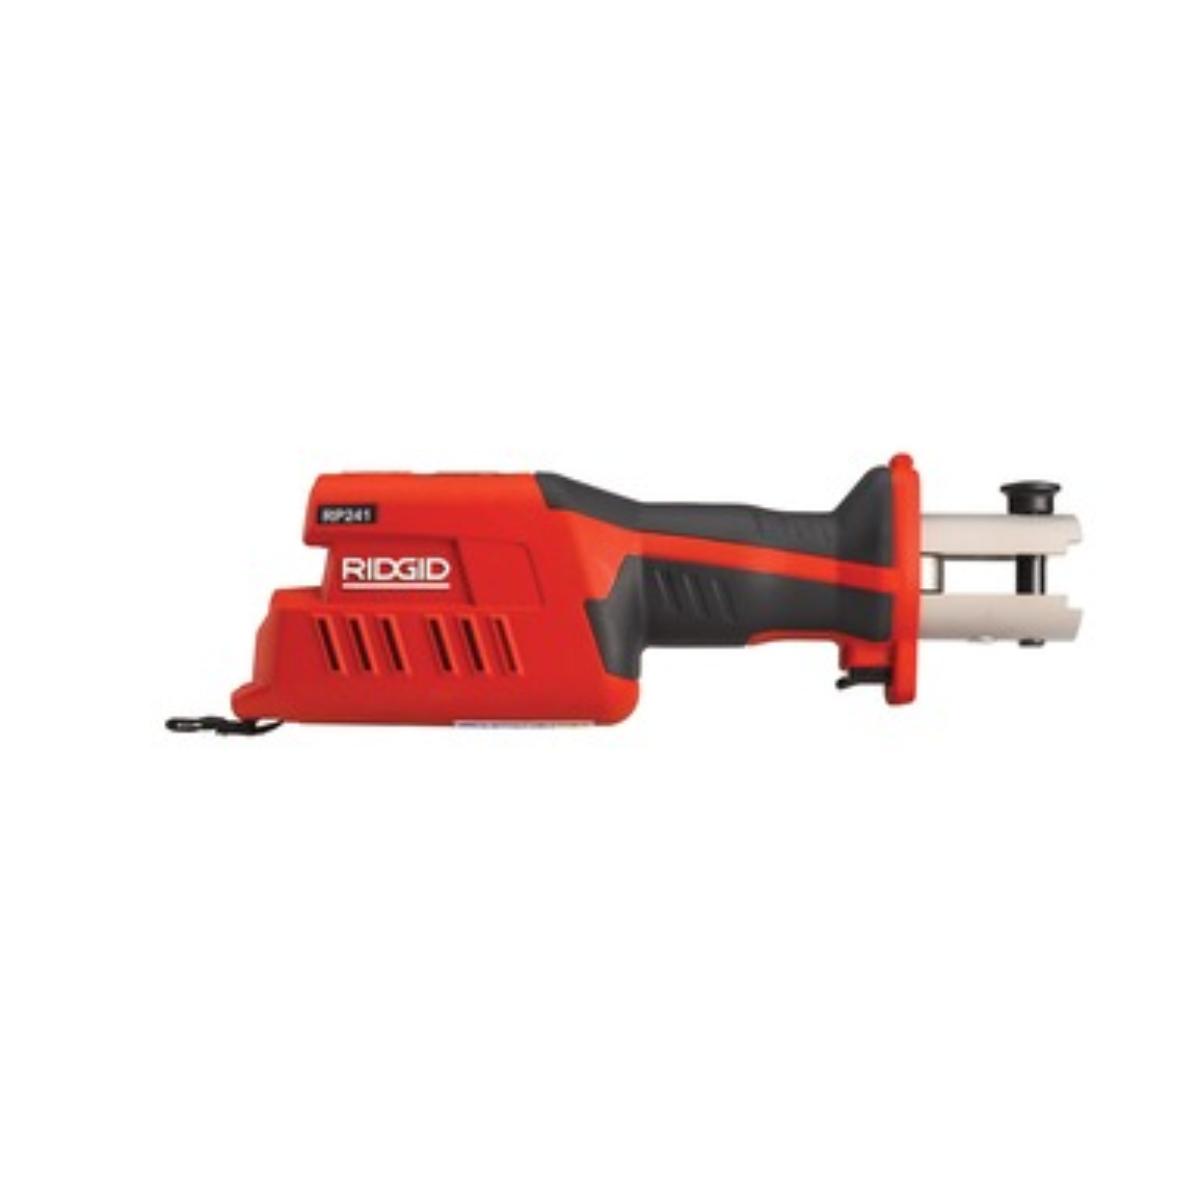 CRIMP TOOL RP241 TOOL ONLY